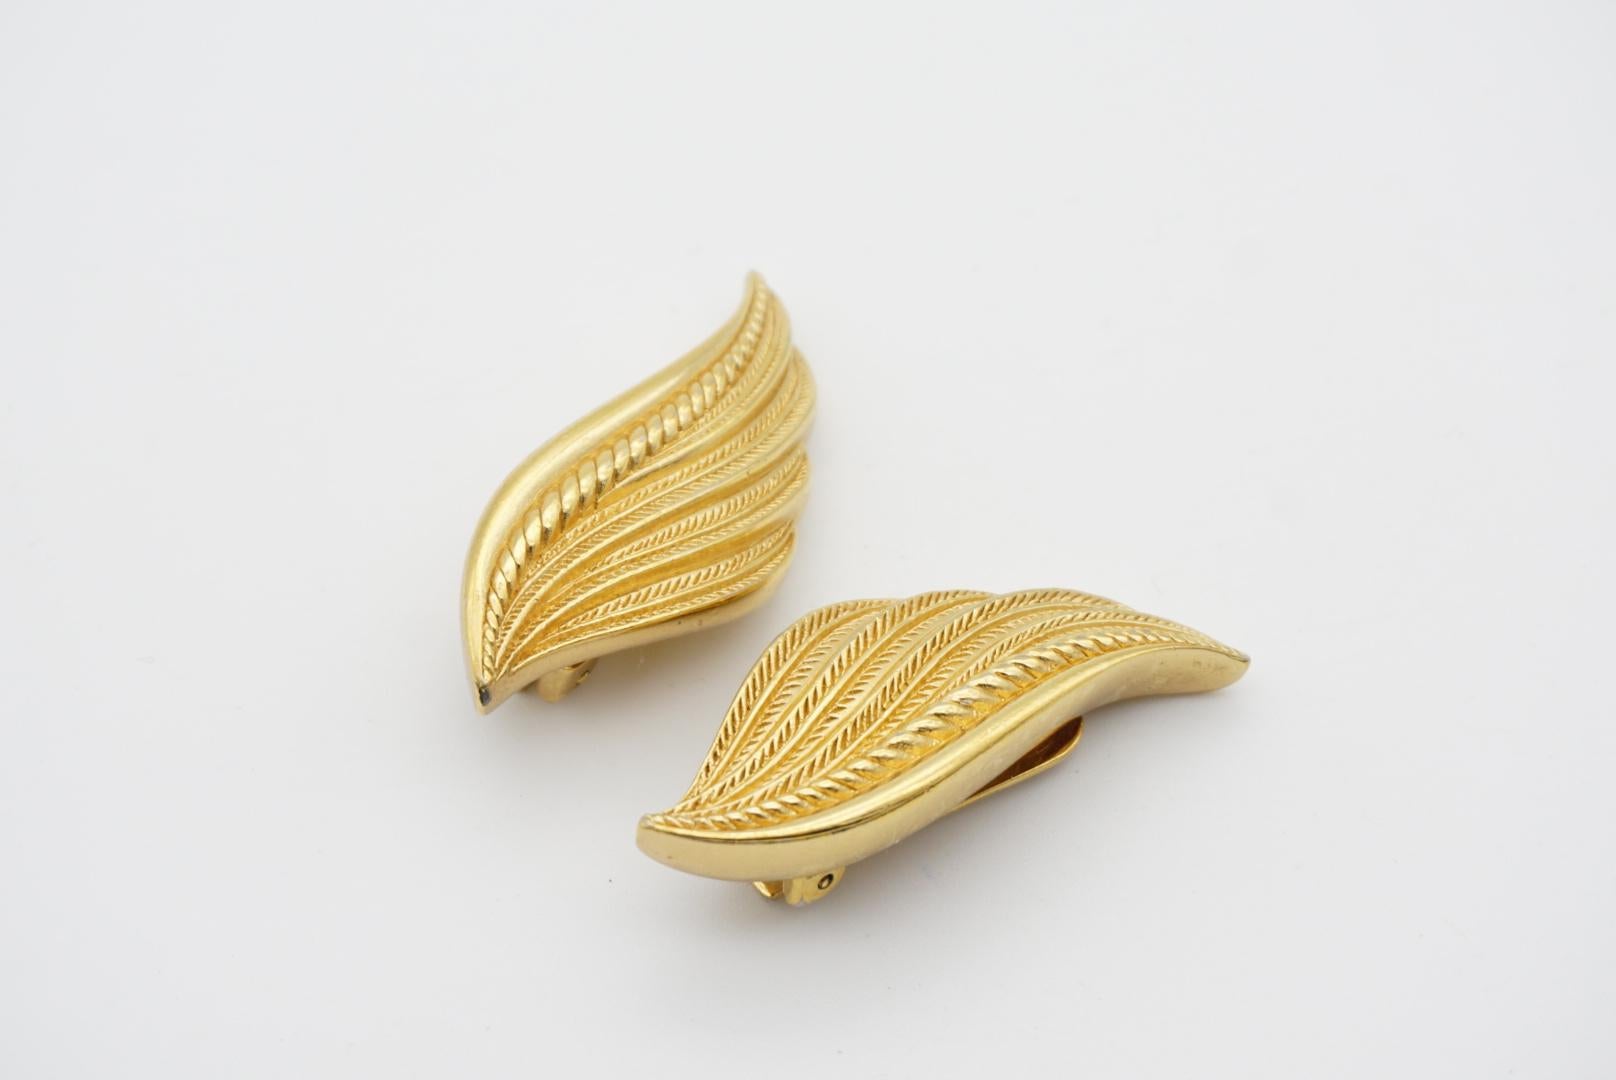 Christian Dior Vintage 1980s Large Textured Wing Leaf Fire Gold Clip Earrings In Excellent Condition For Sale In Wokingham, England